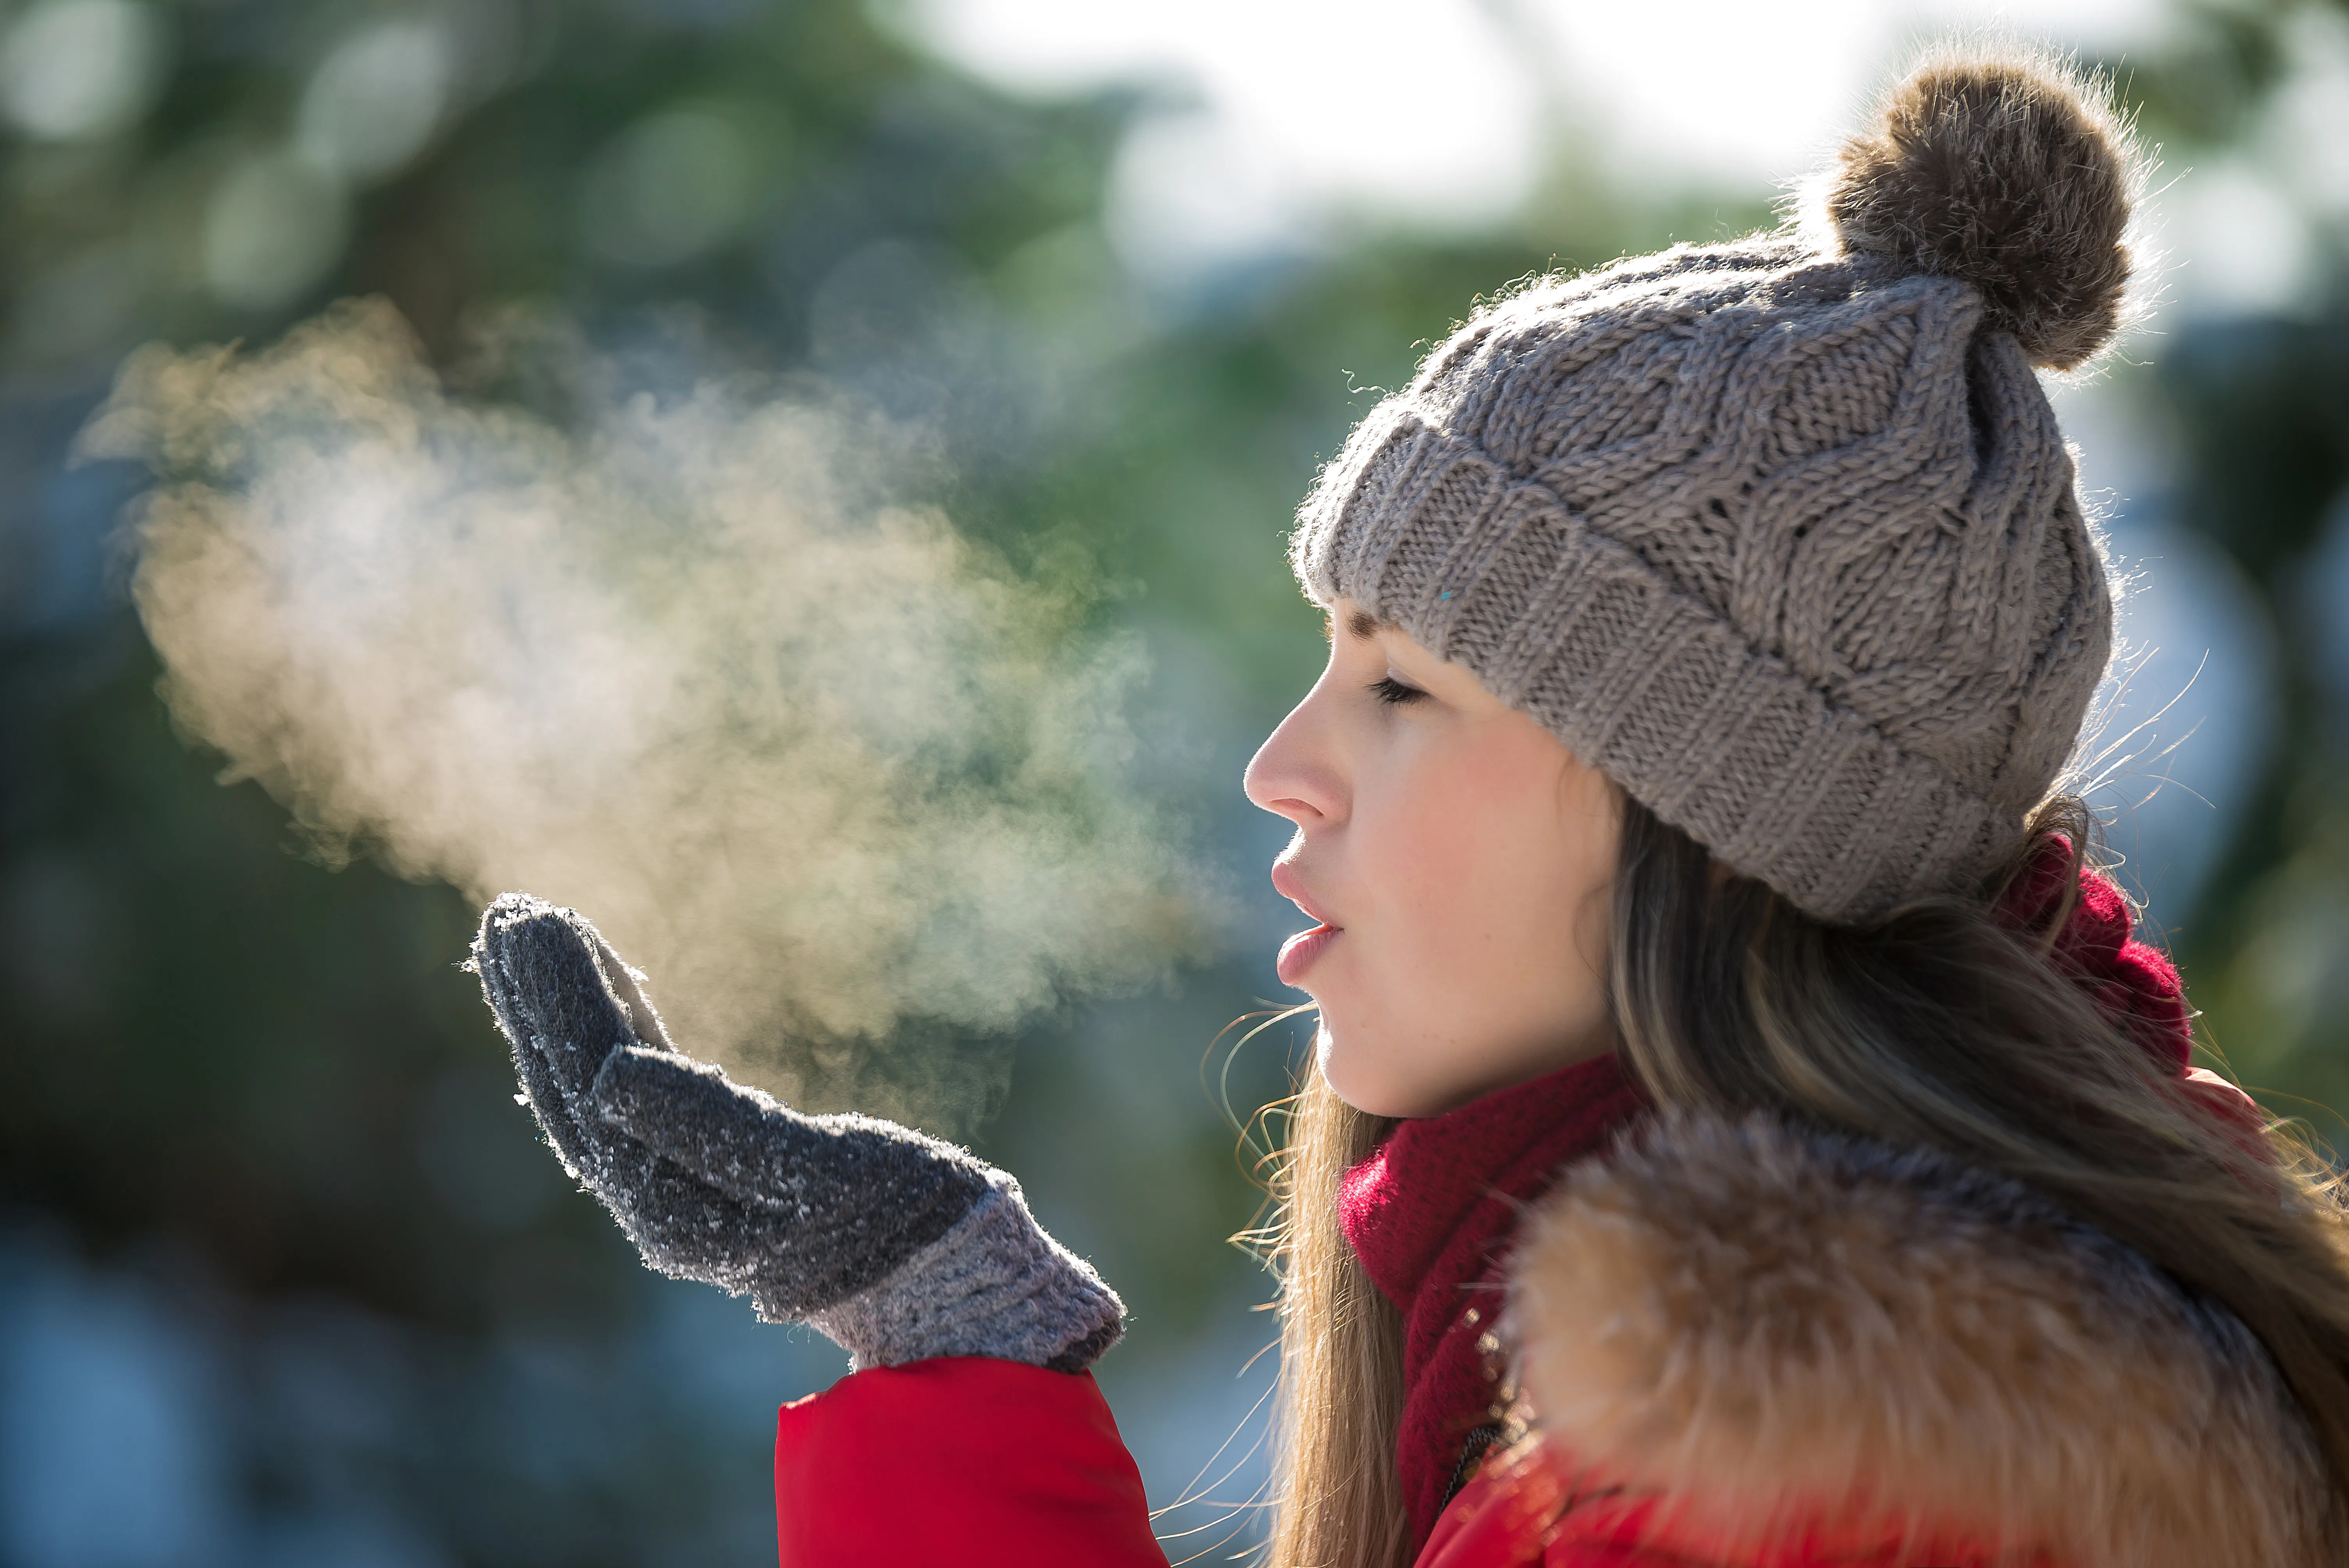 These Are the Most Common Winter Health Woes – Here’s How to Handle Them